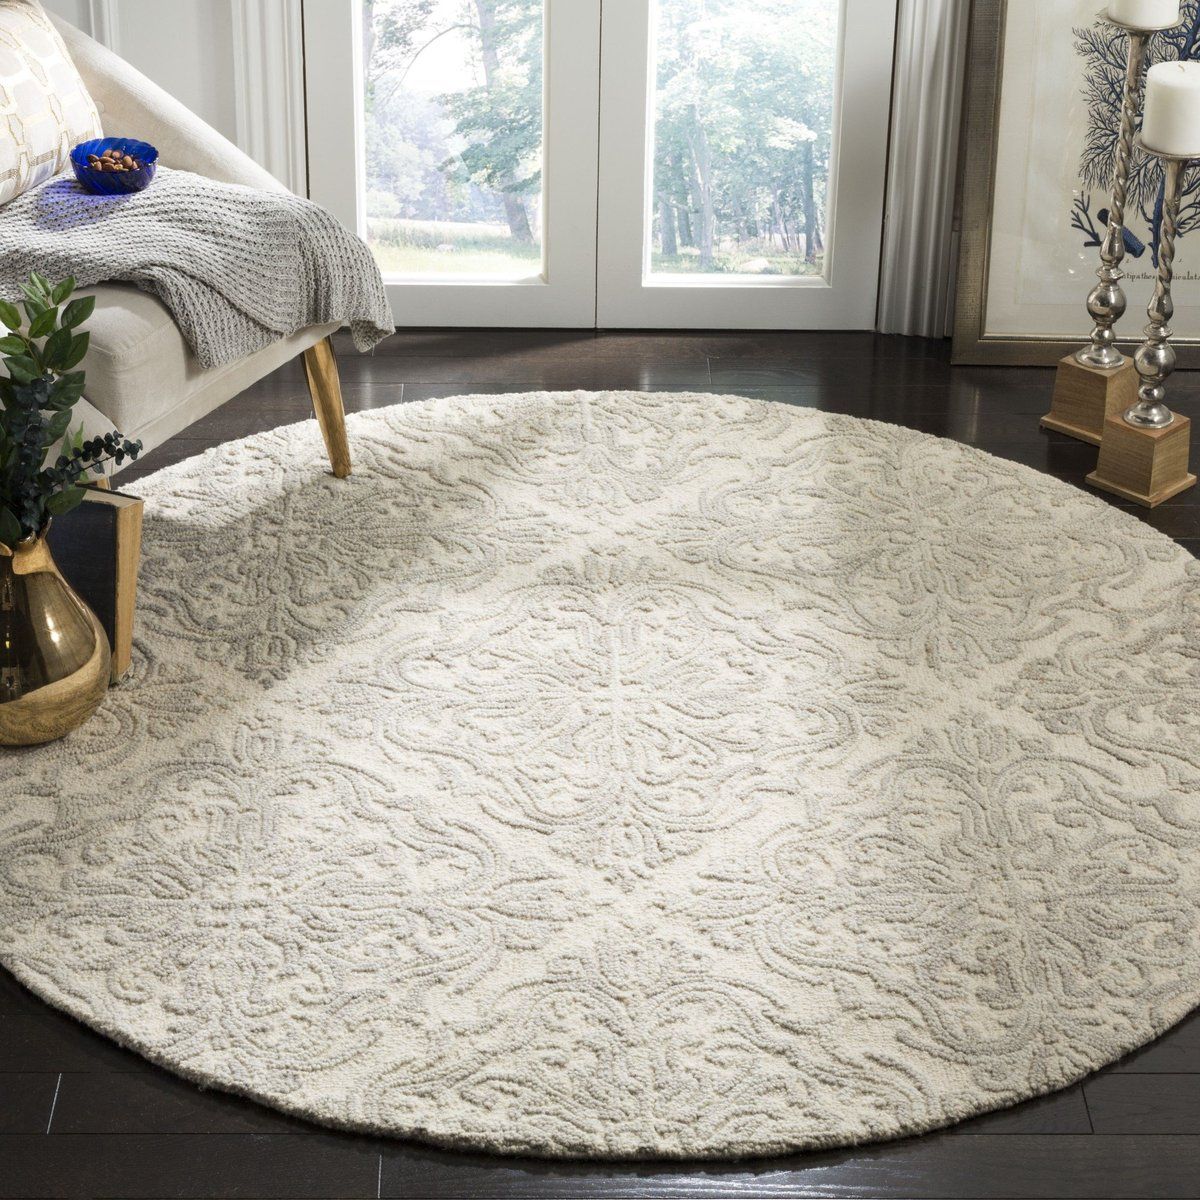 Safavieh Blossom Blm 103 Rugs | Rugs Direct Regarding Ivory Blossom Oval Rugs (Photo 3 of 15)